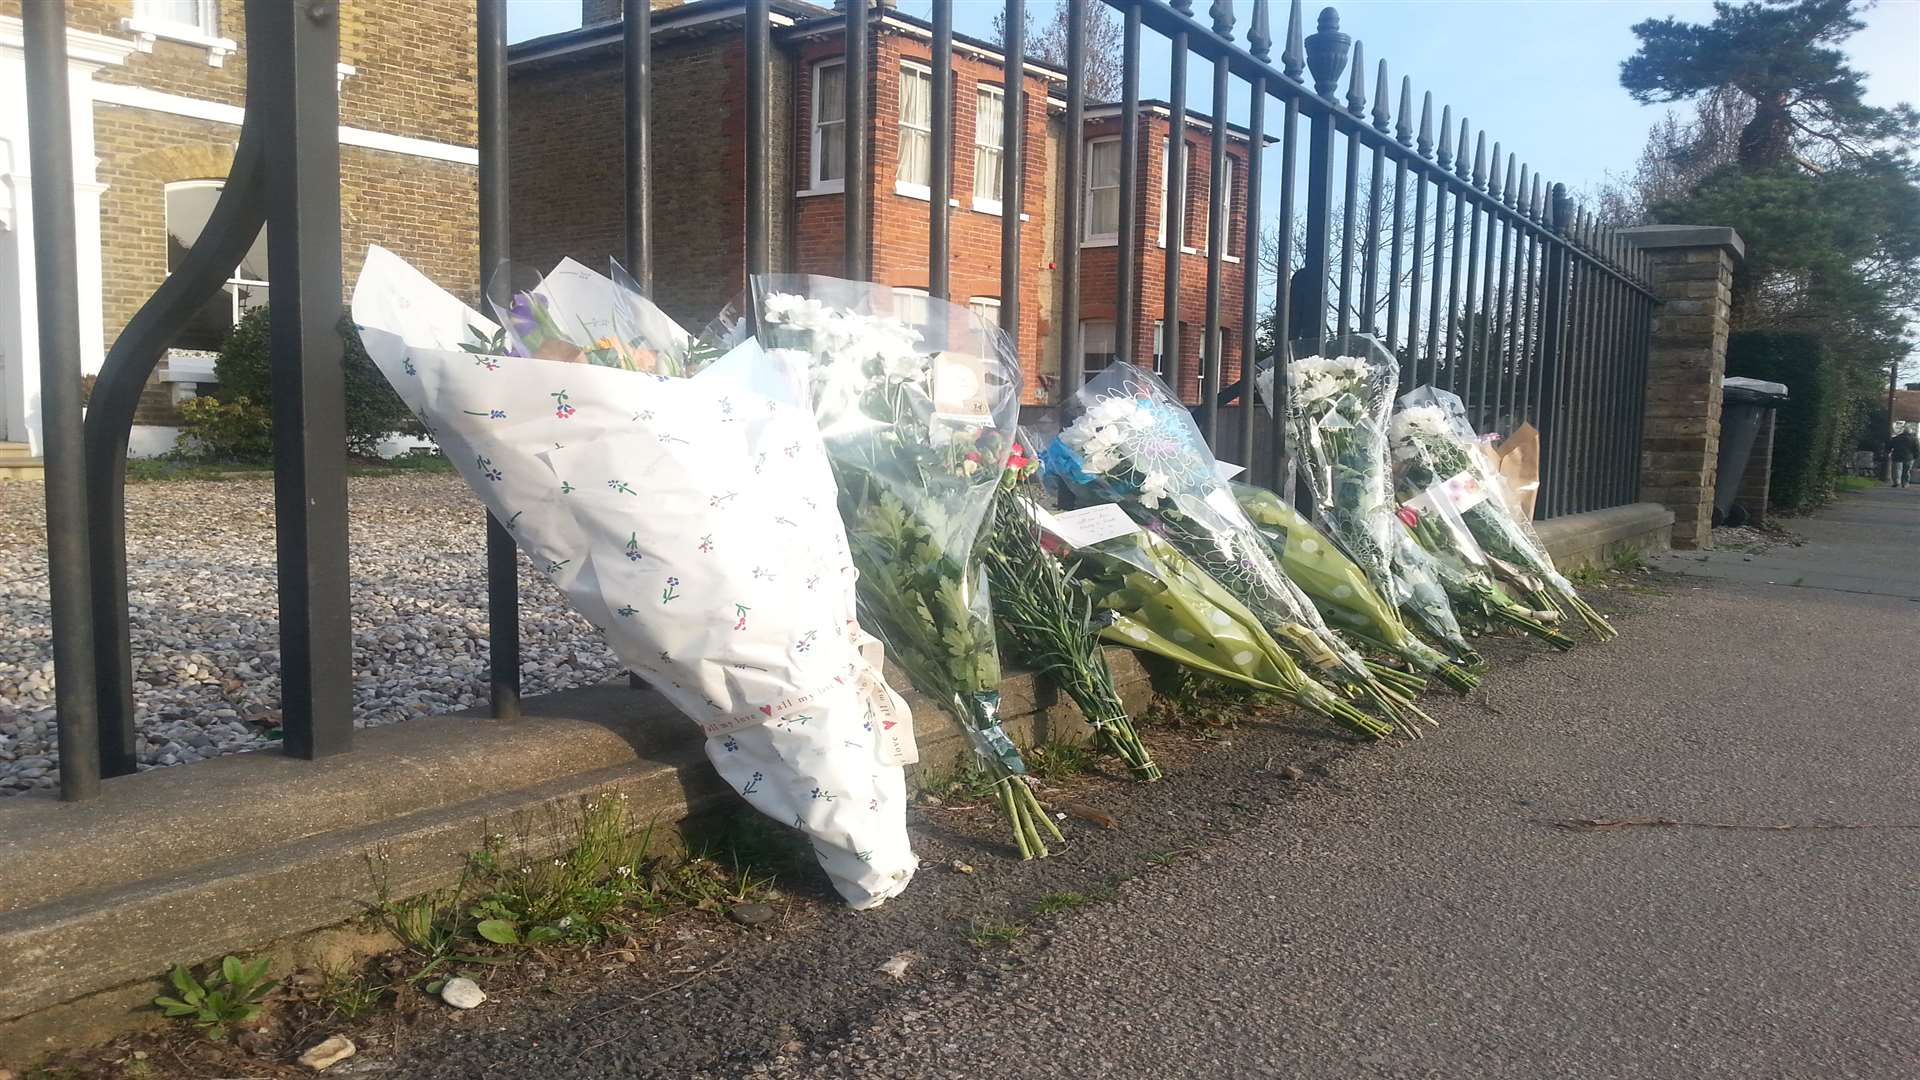 Flowers have been left at the scene of the tragedy